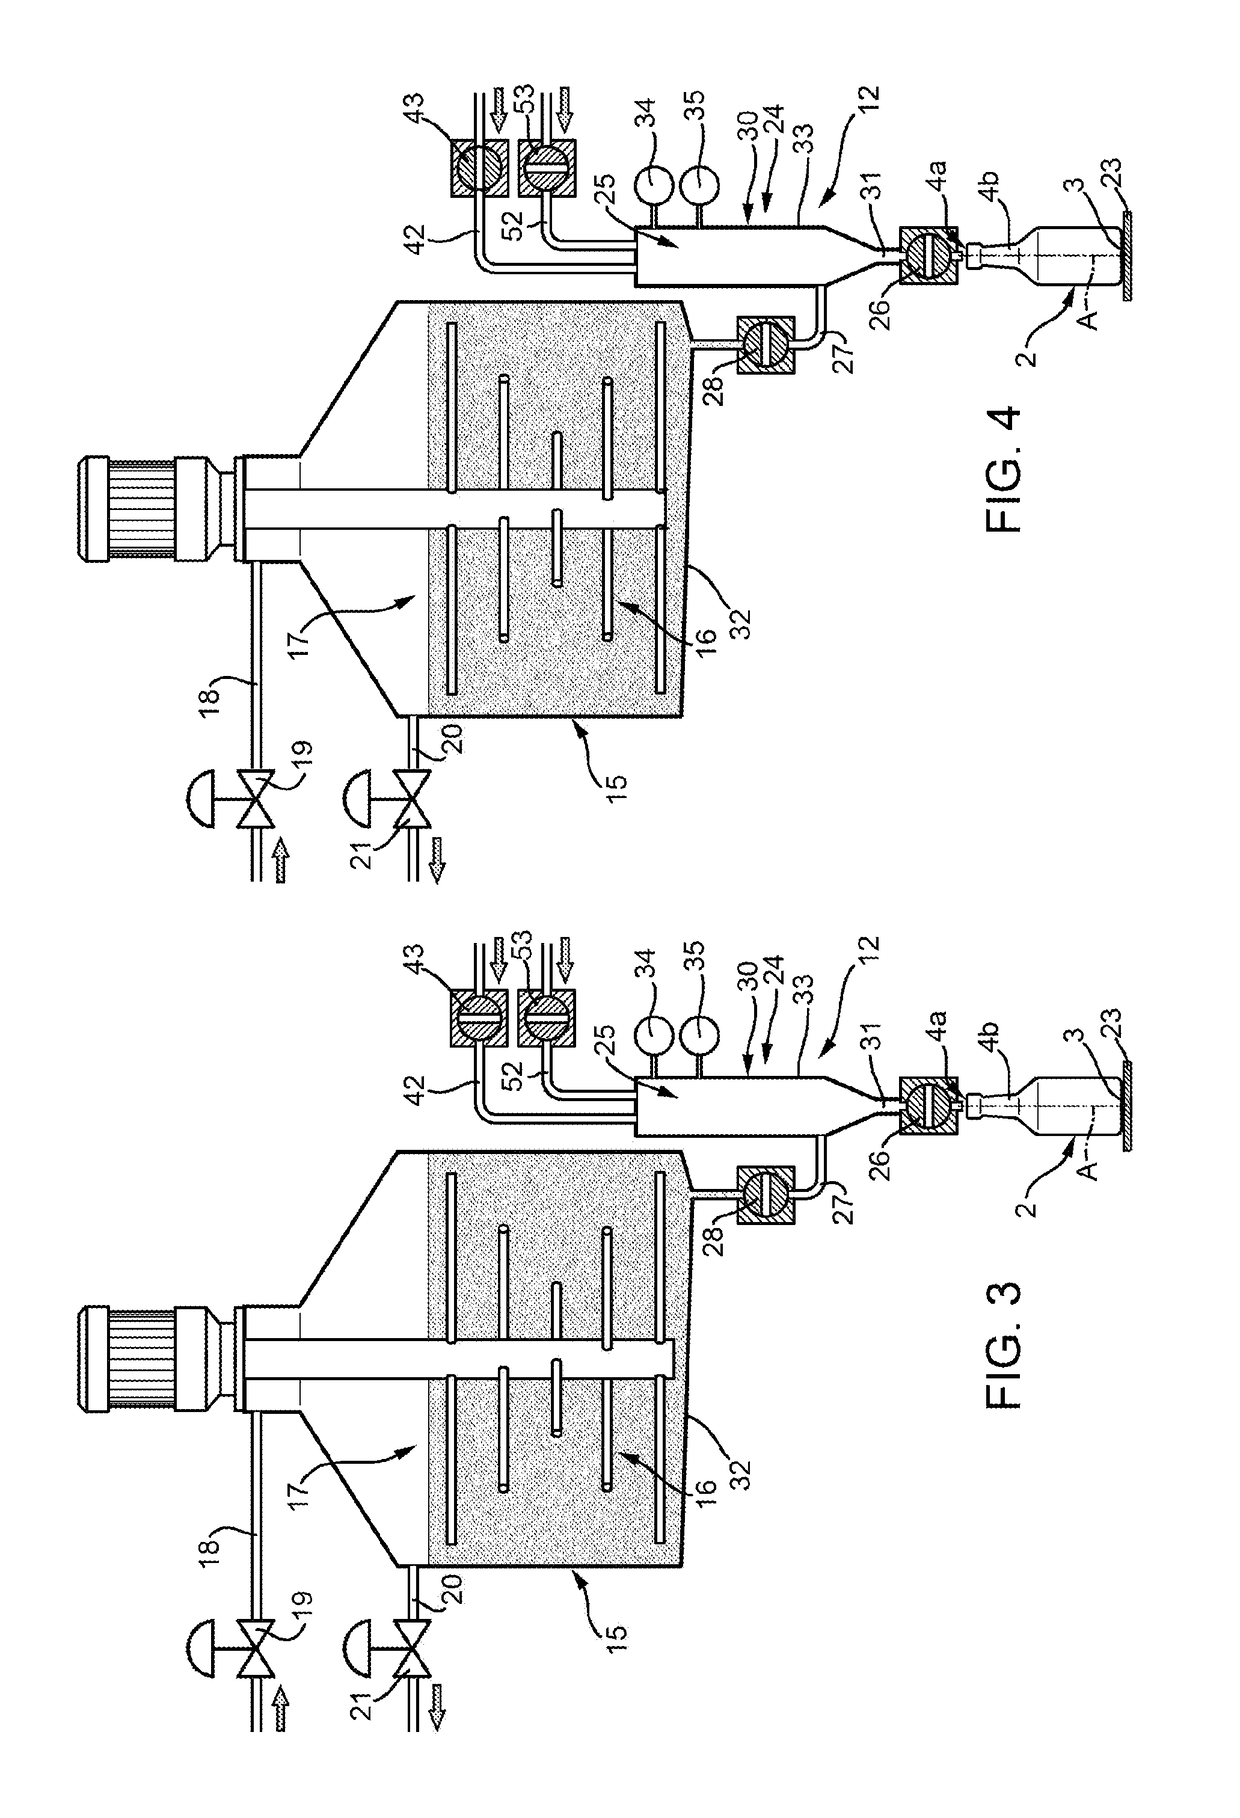 Machine and method for filling containers with pourable product